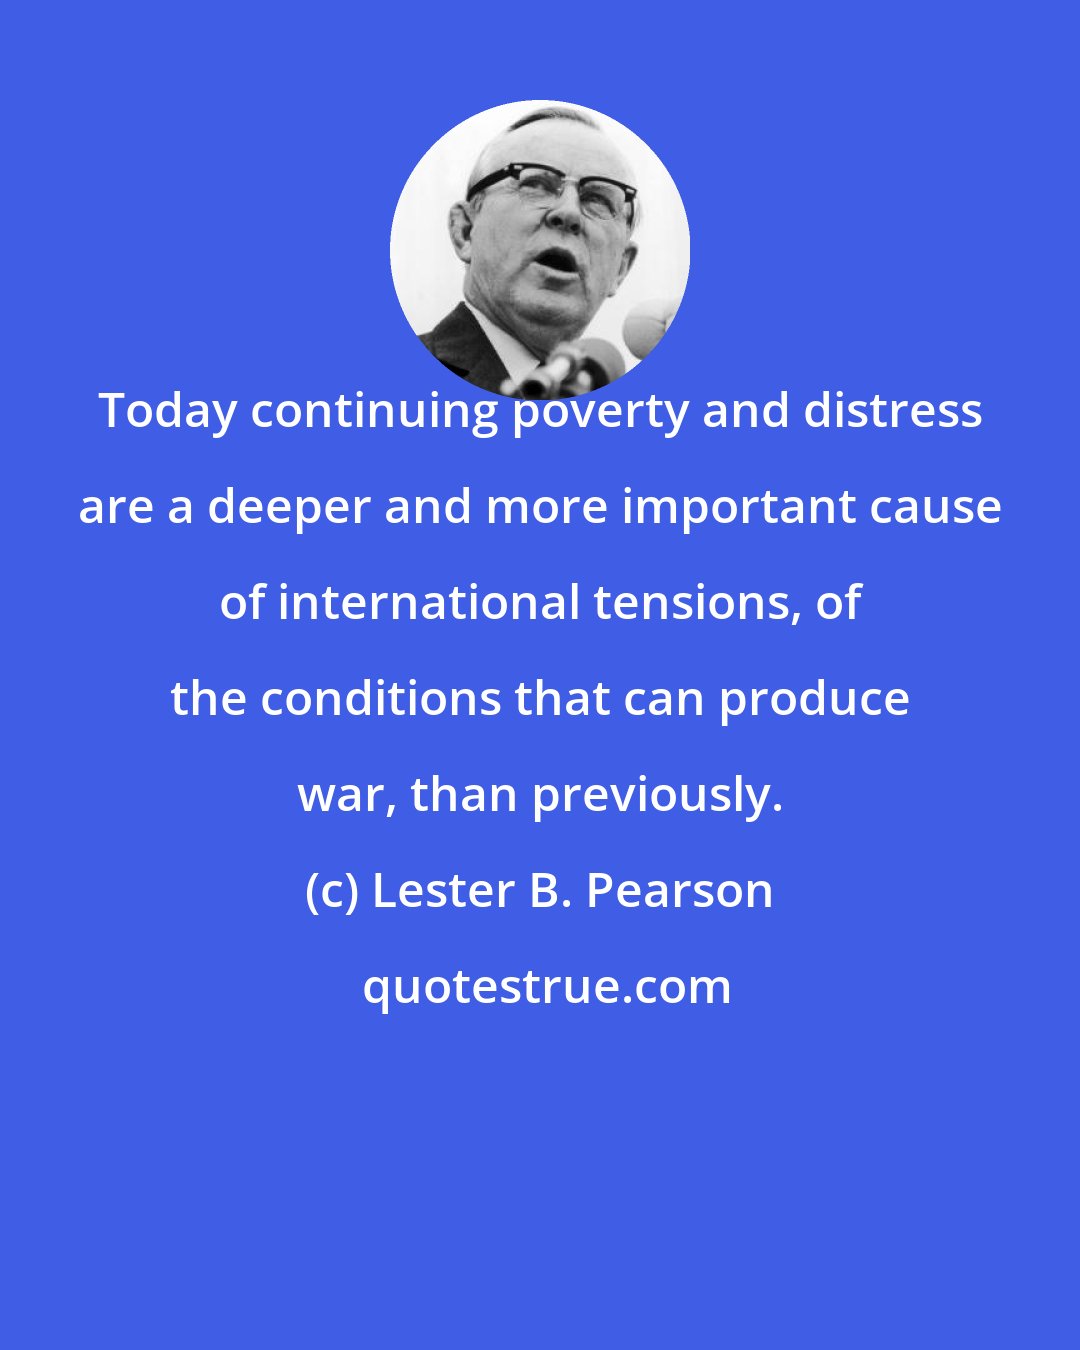 Lester B. Pearson: Today continuing poverty and distress are a deeper and more important cause of international tensions, of the conditions that can produce war, than previously.